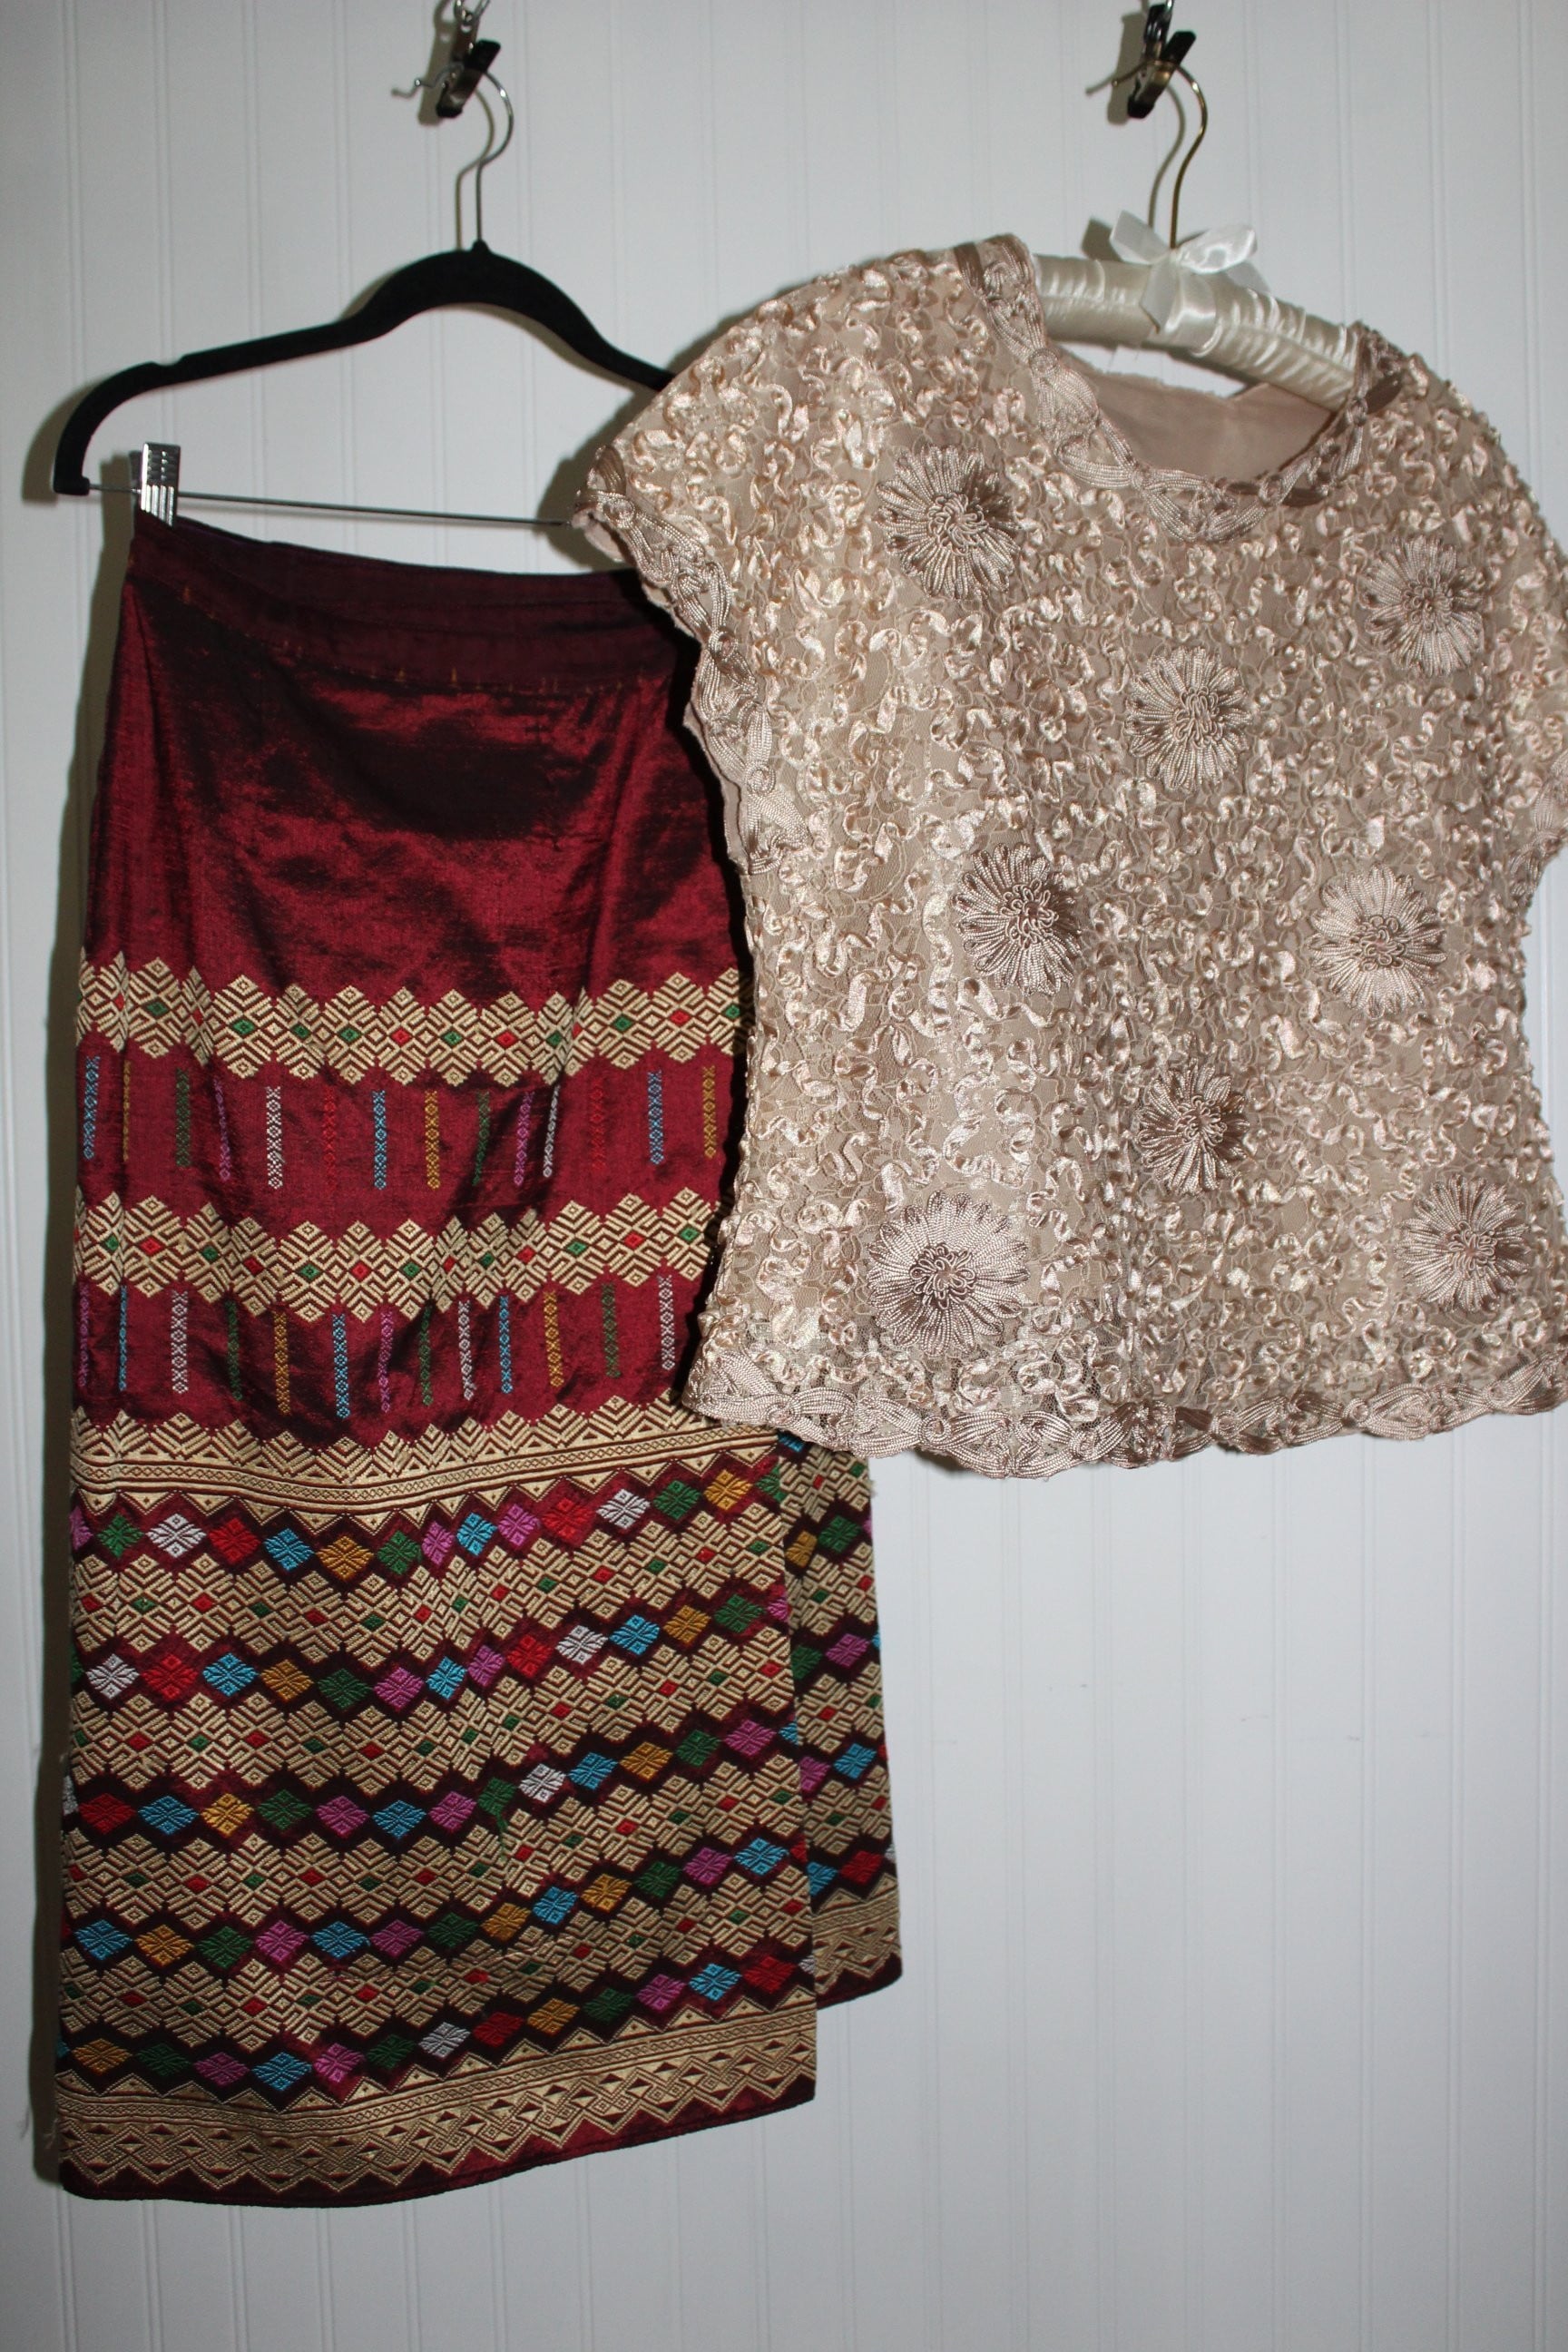 Thailand 2 Piece Wrap Skirt Woven Gold Thread Ribbon Embroidered Top Authenticate Custom Made party dress